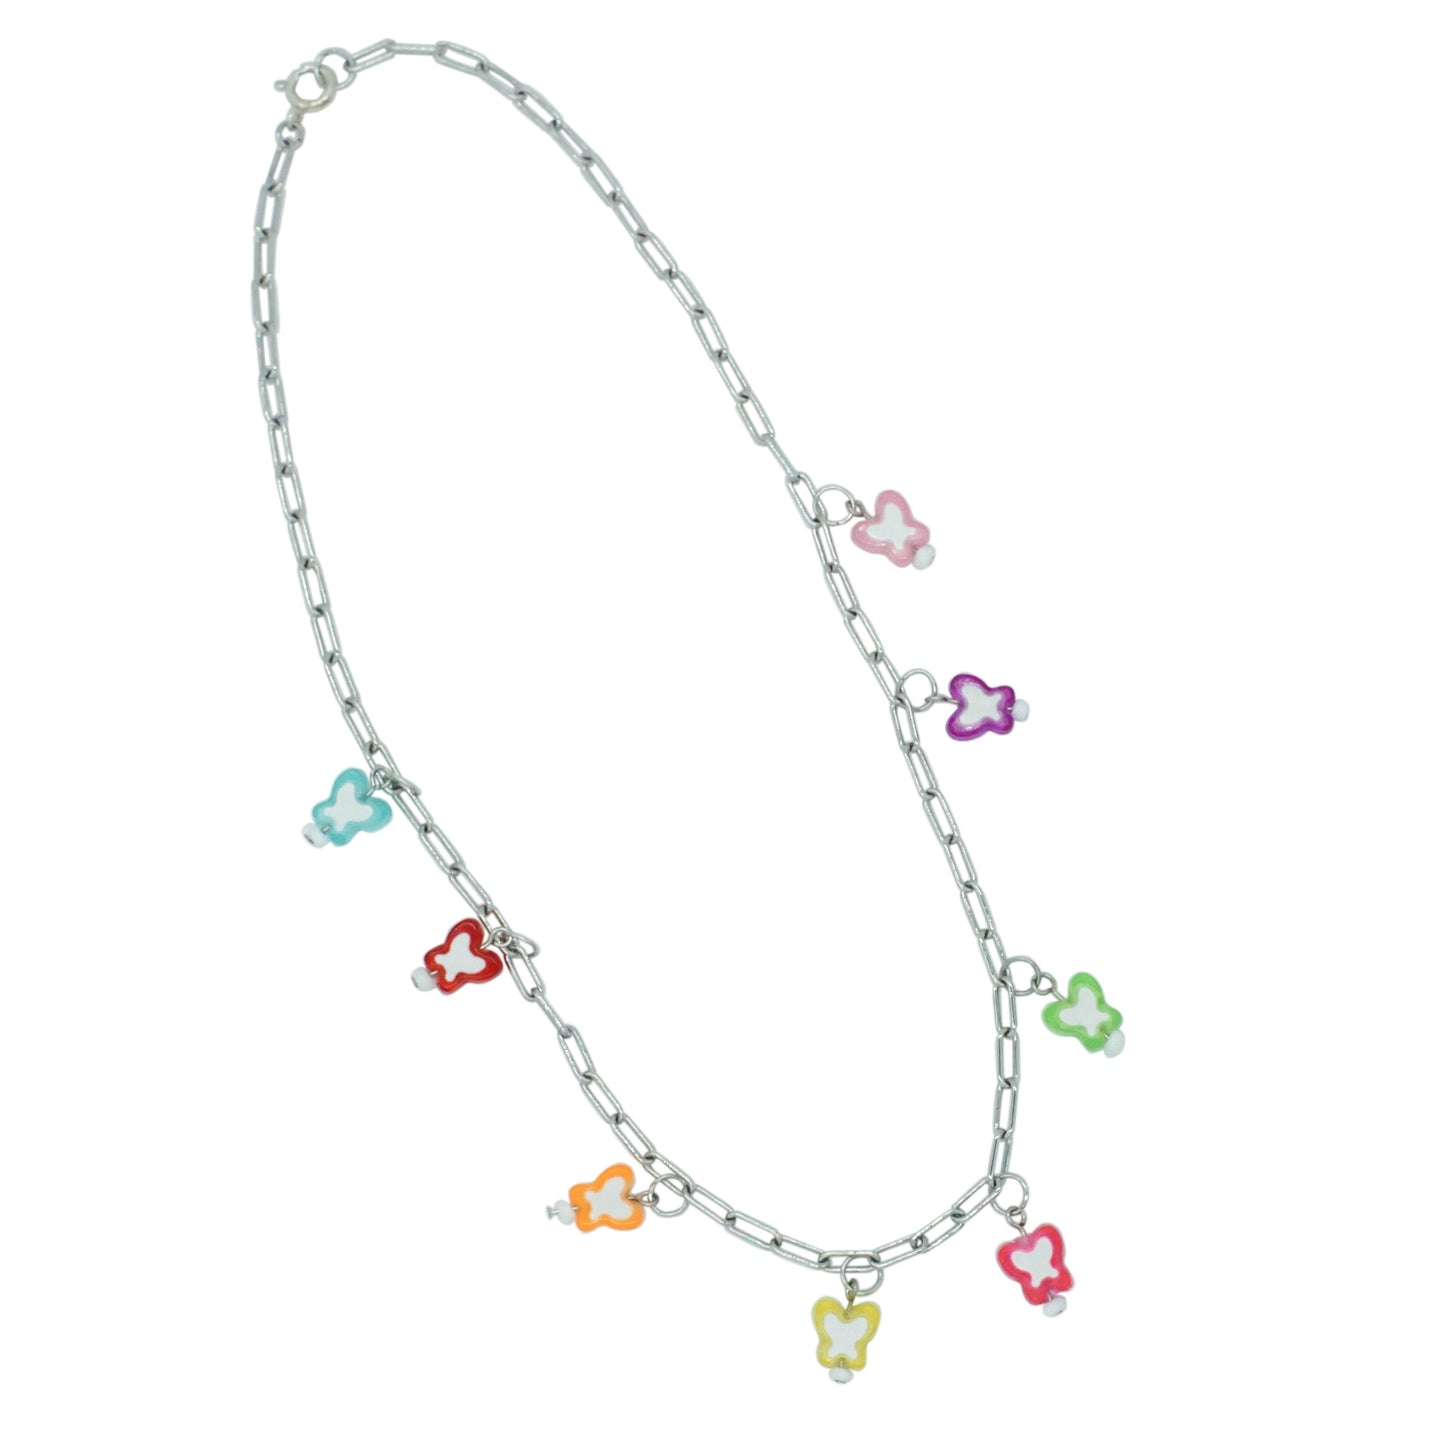 Silver Chain Necklace with Butterfly Charms - BUTTERFLY GARDEN